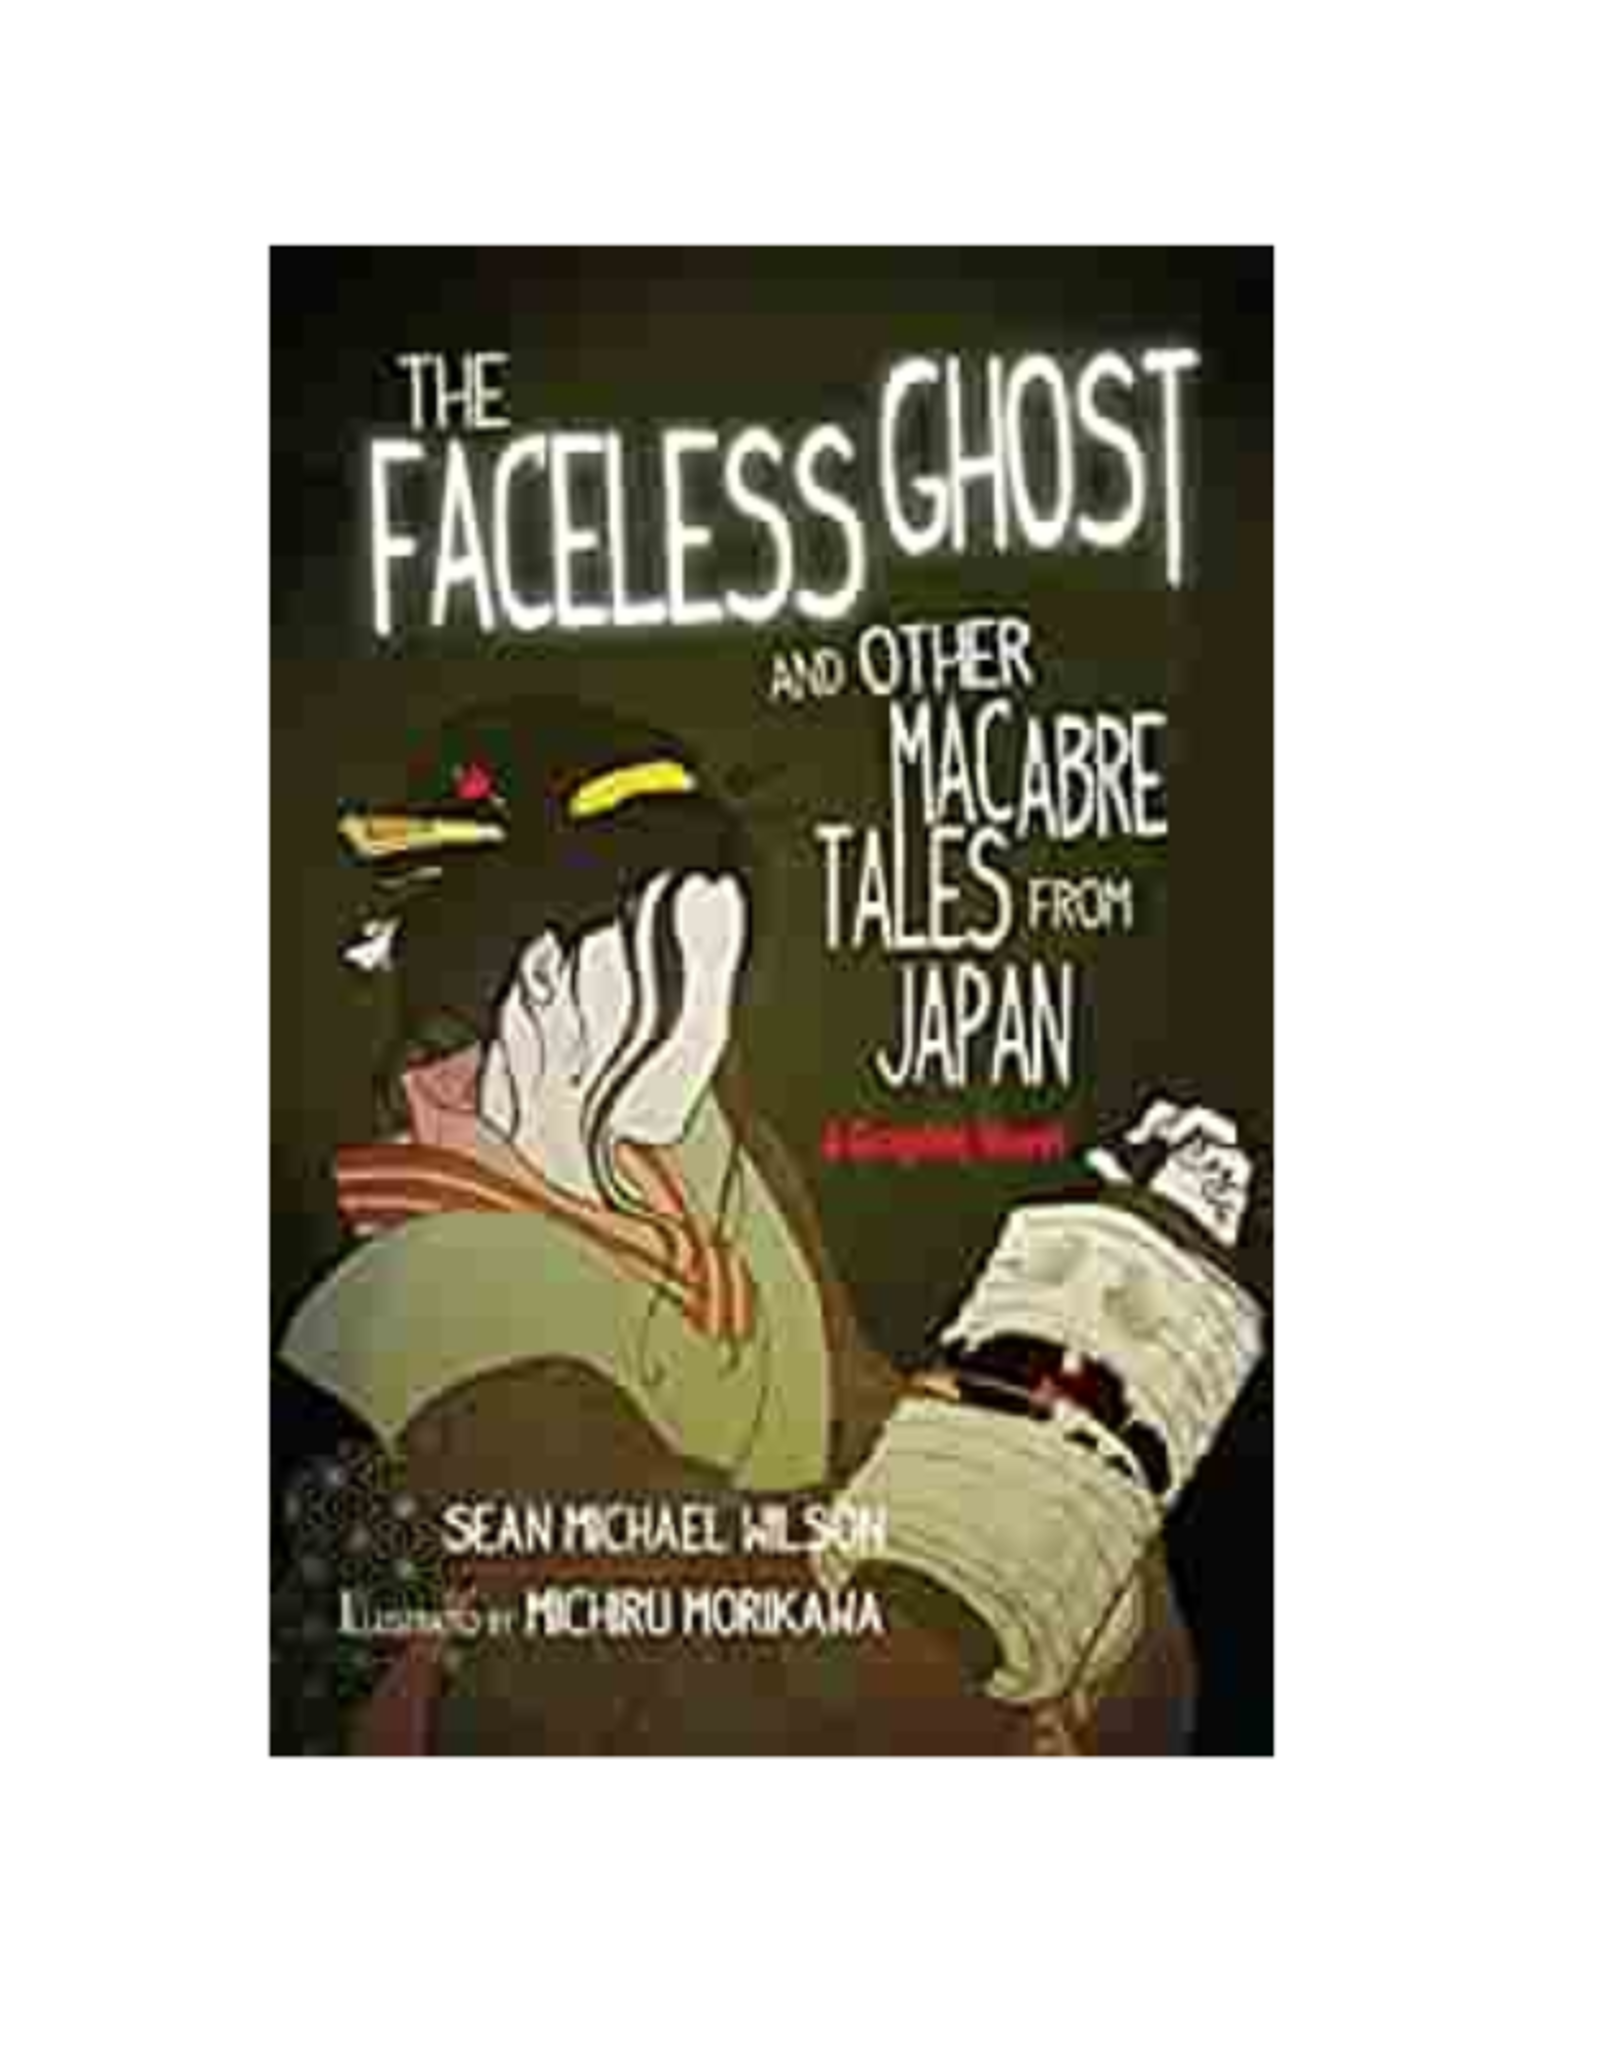 Penguin Random House "The Faceless Ghost" and Other Macabre Tales from Japan